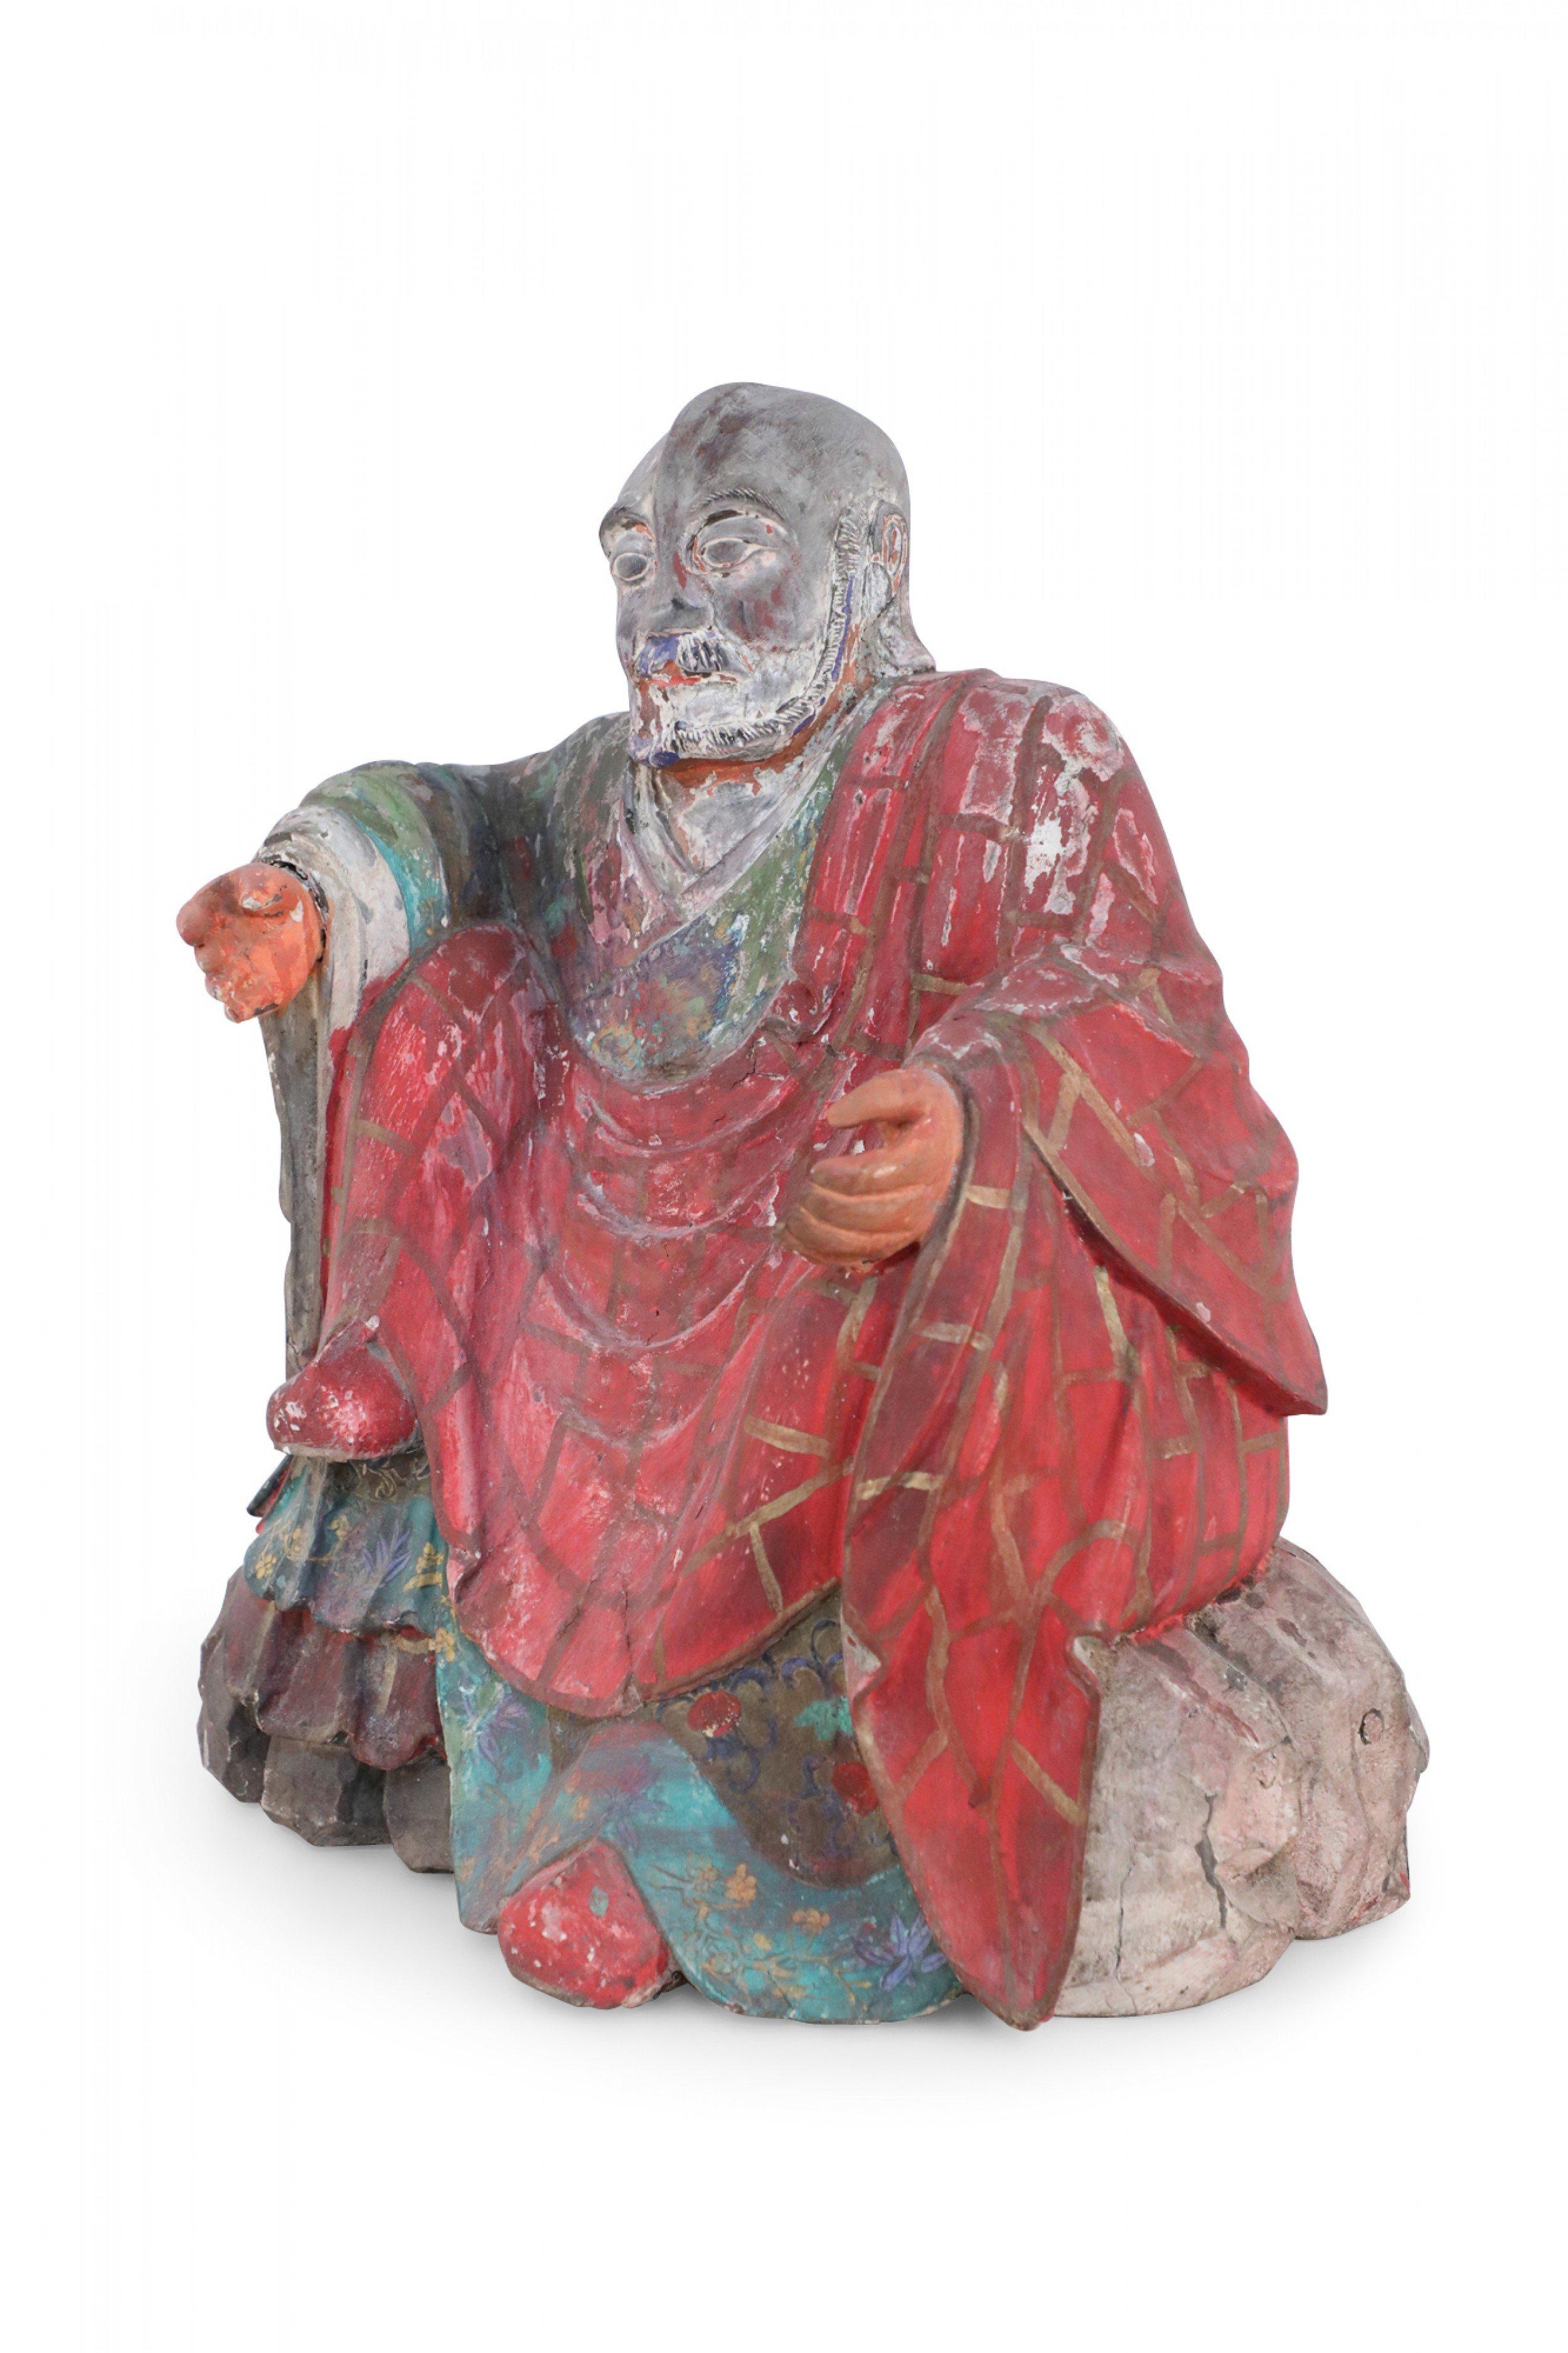 Antique Chinese (early 20th Century, Republic of China) clay Buddha sculpture with painted details and red and green robes.
 